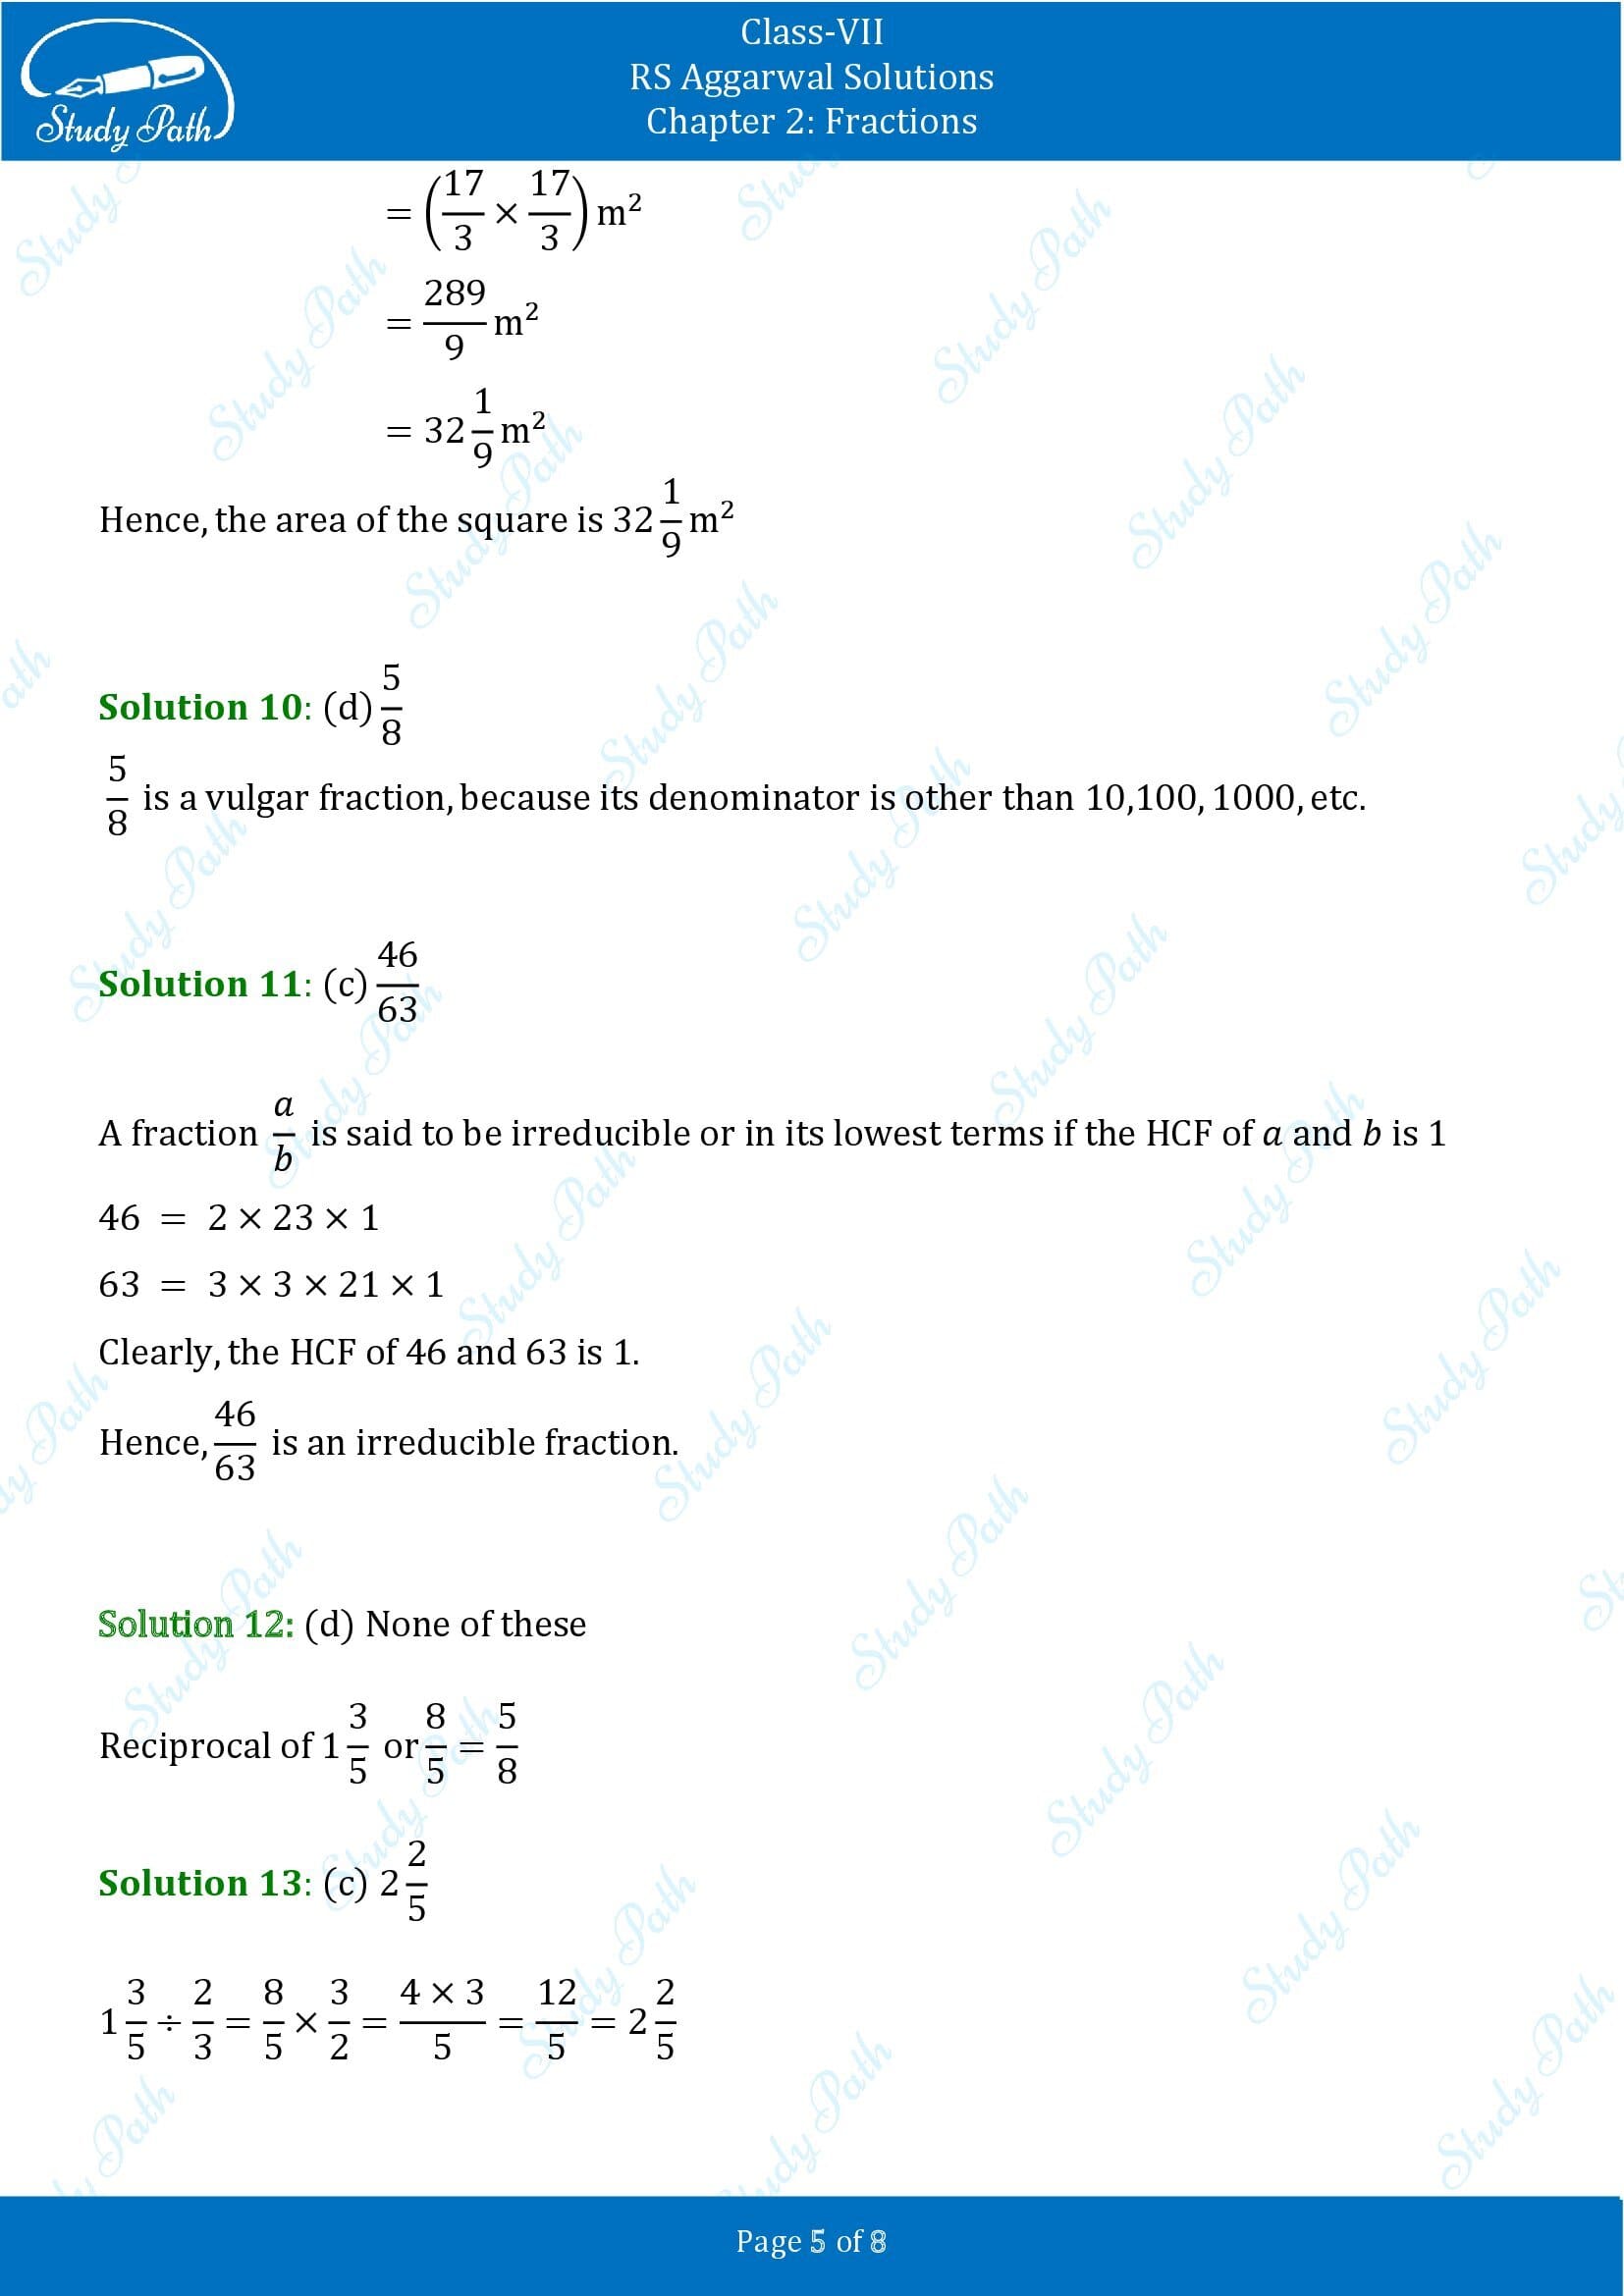 RS Aggarwal Solutions Class 7 Chapter 2 Fractions Test Paper 00005